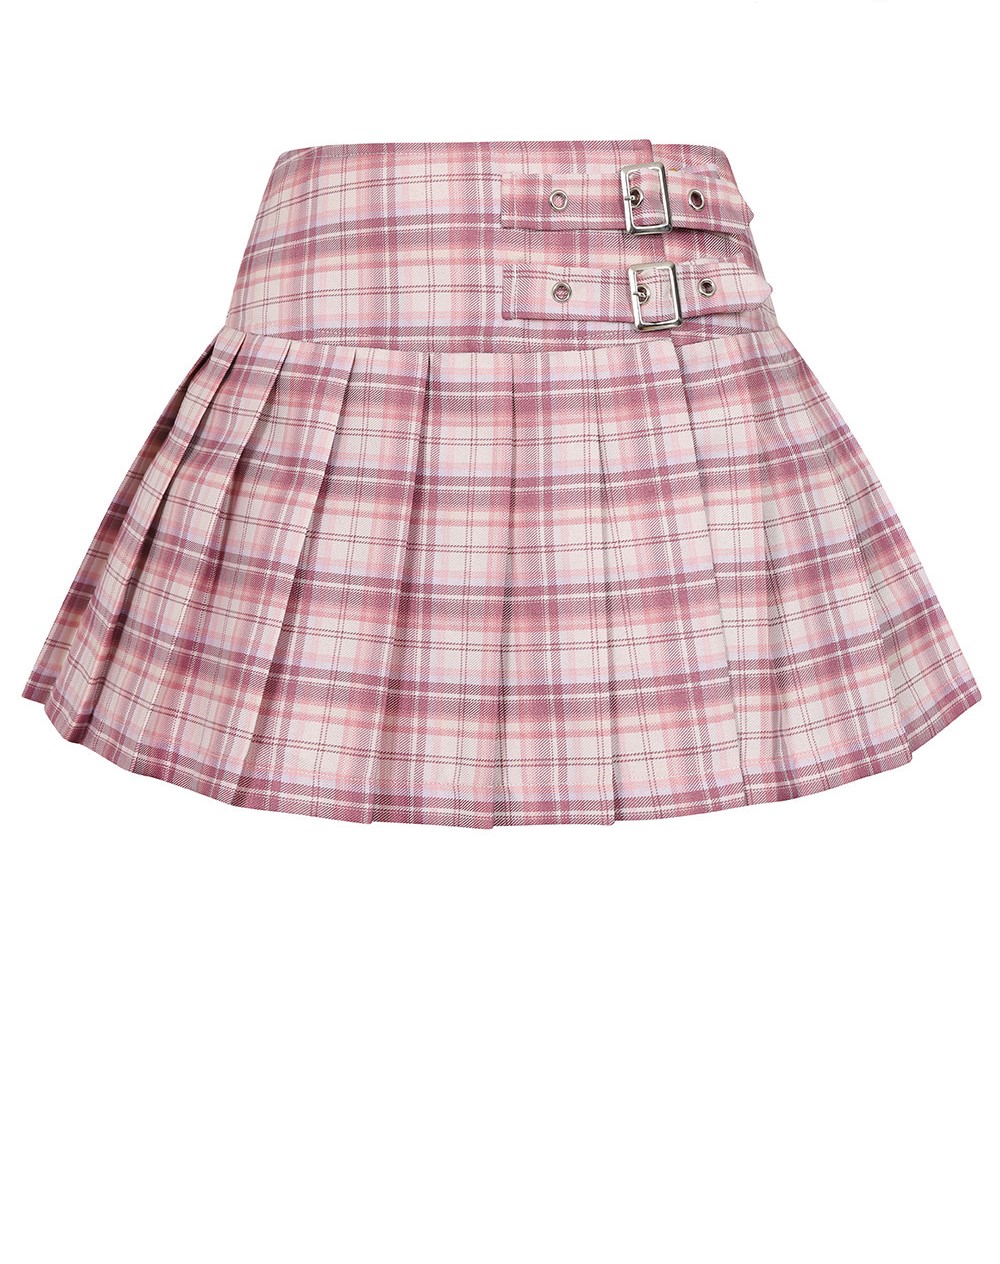 Pleated Plaid Skirt 0216 Pink/White | Nightshade Corsets